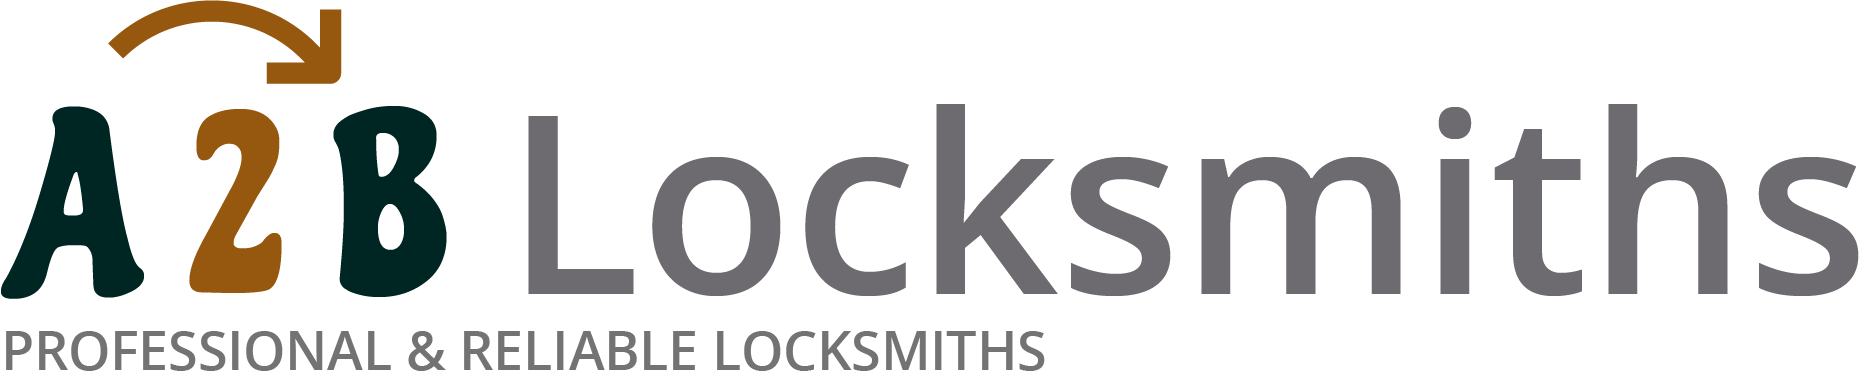 If you are locked out of house in Clacton, our 24/7 local emergency locksmith services can help you.